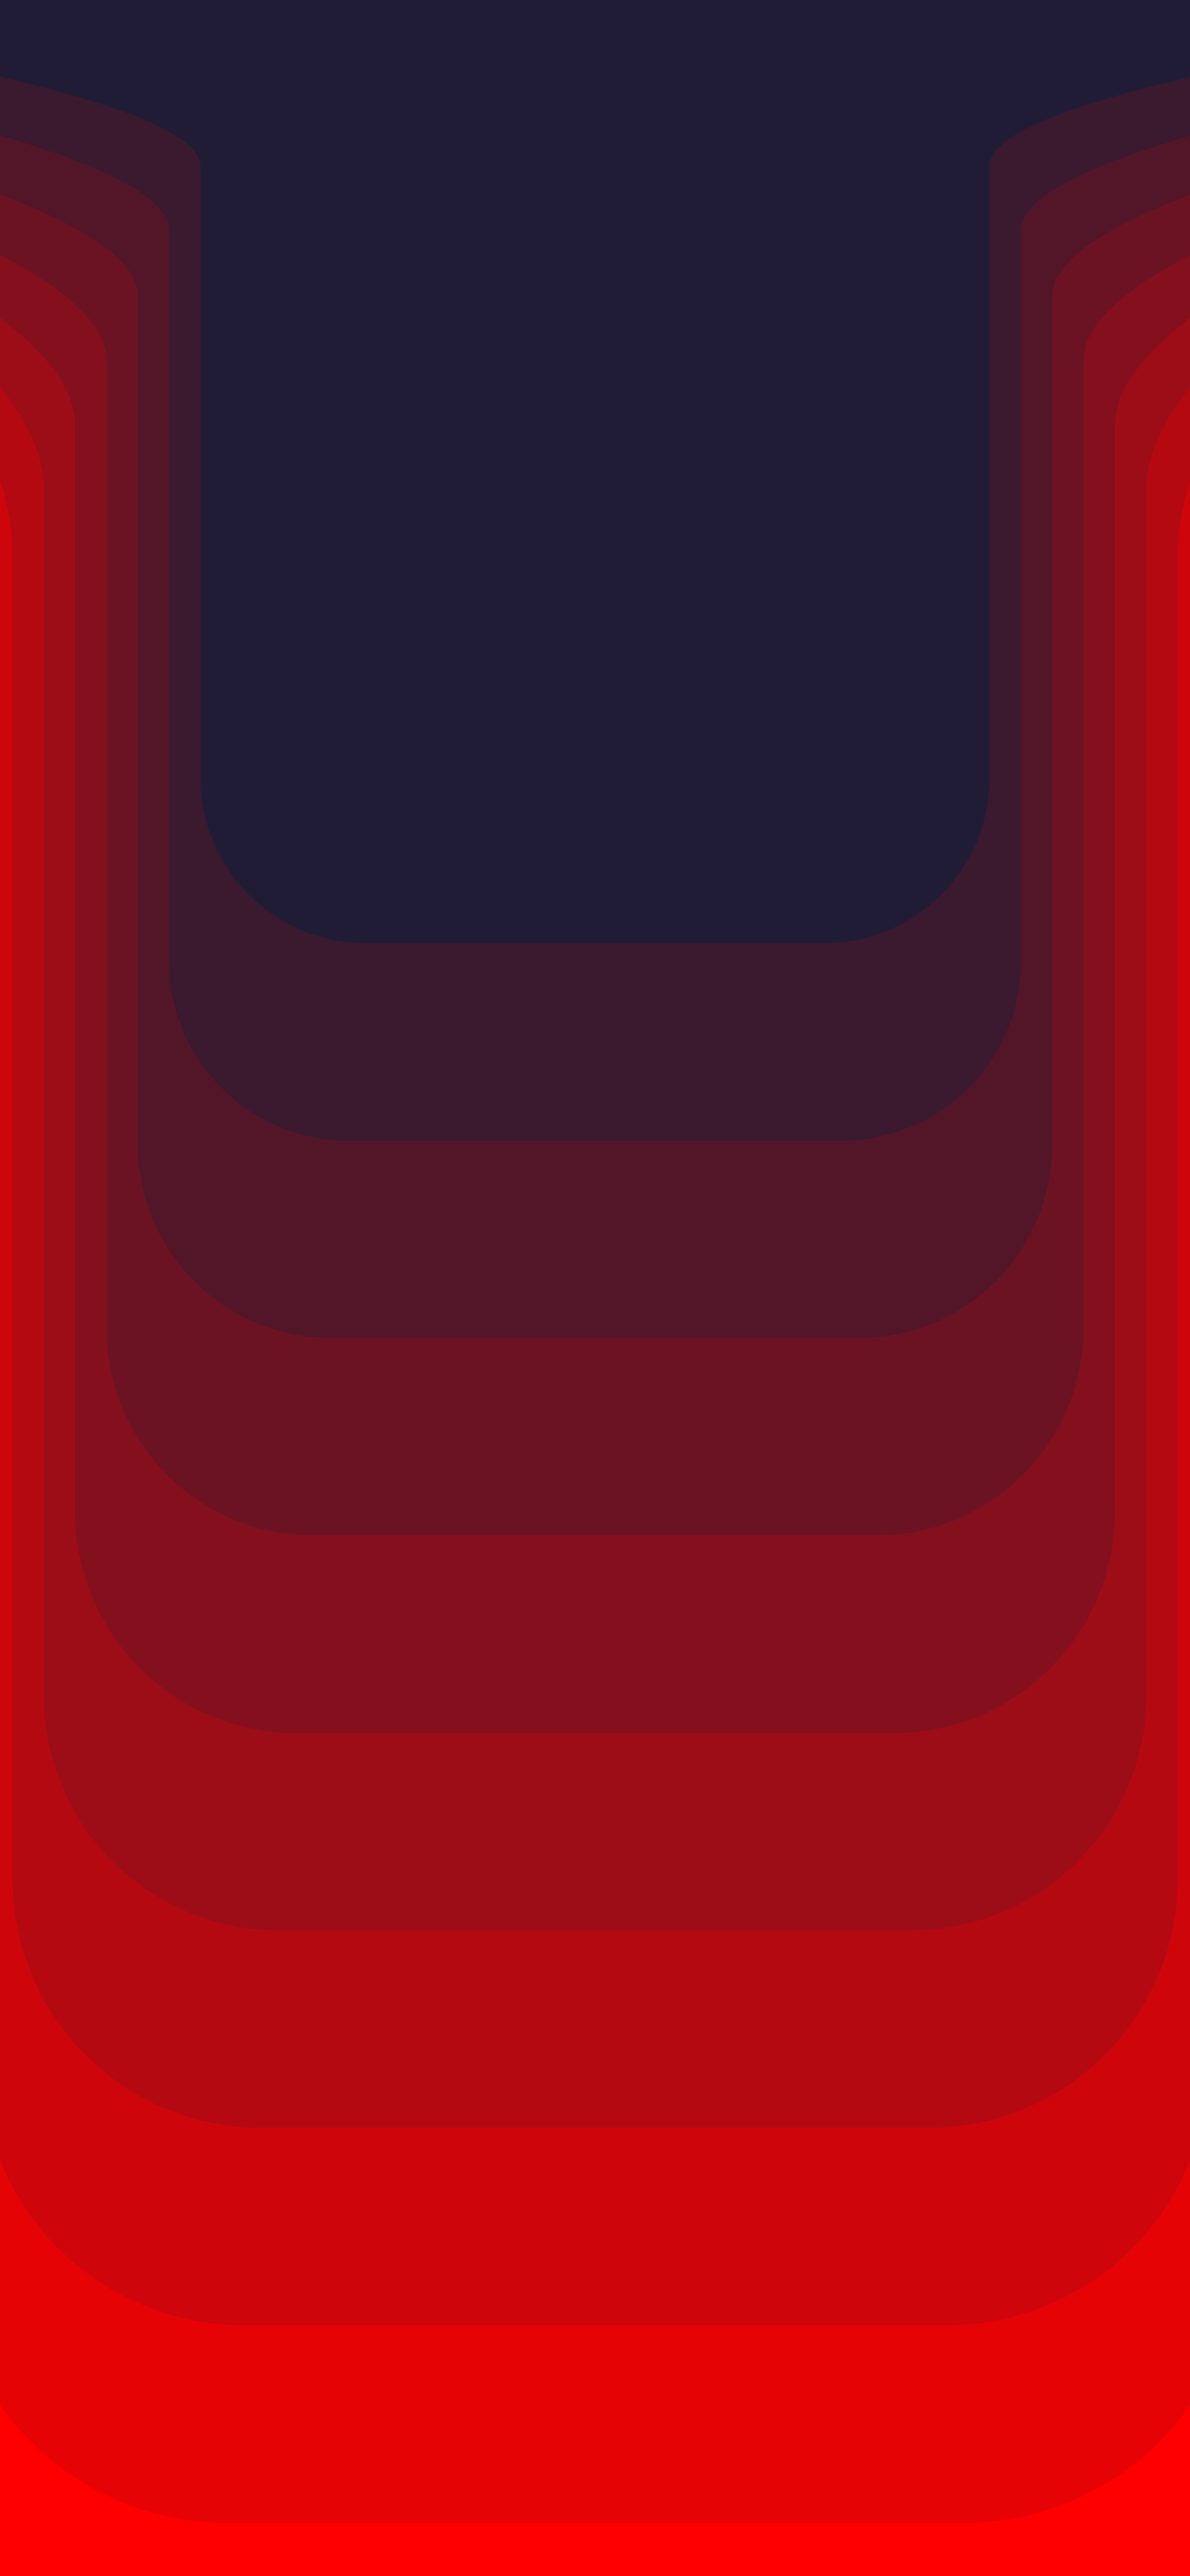 gradient-dark-and-red